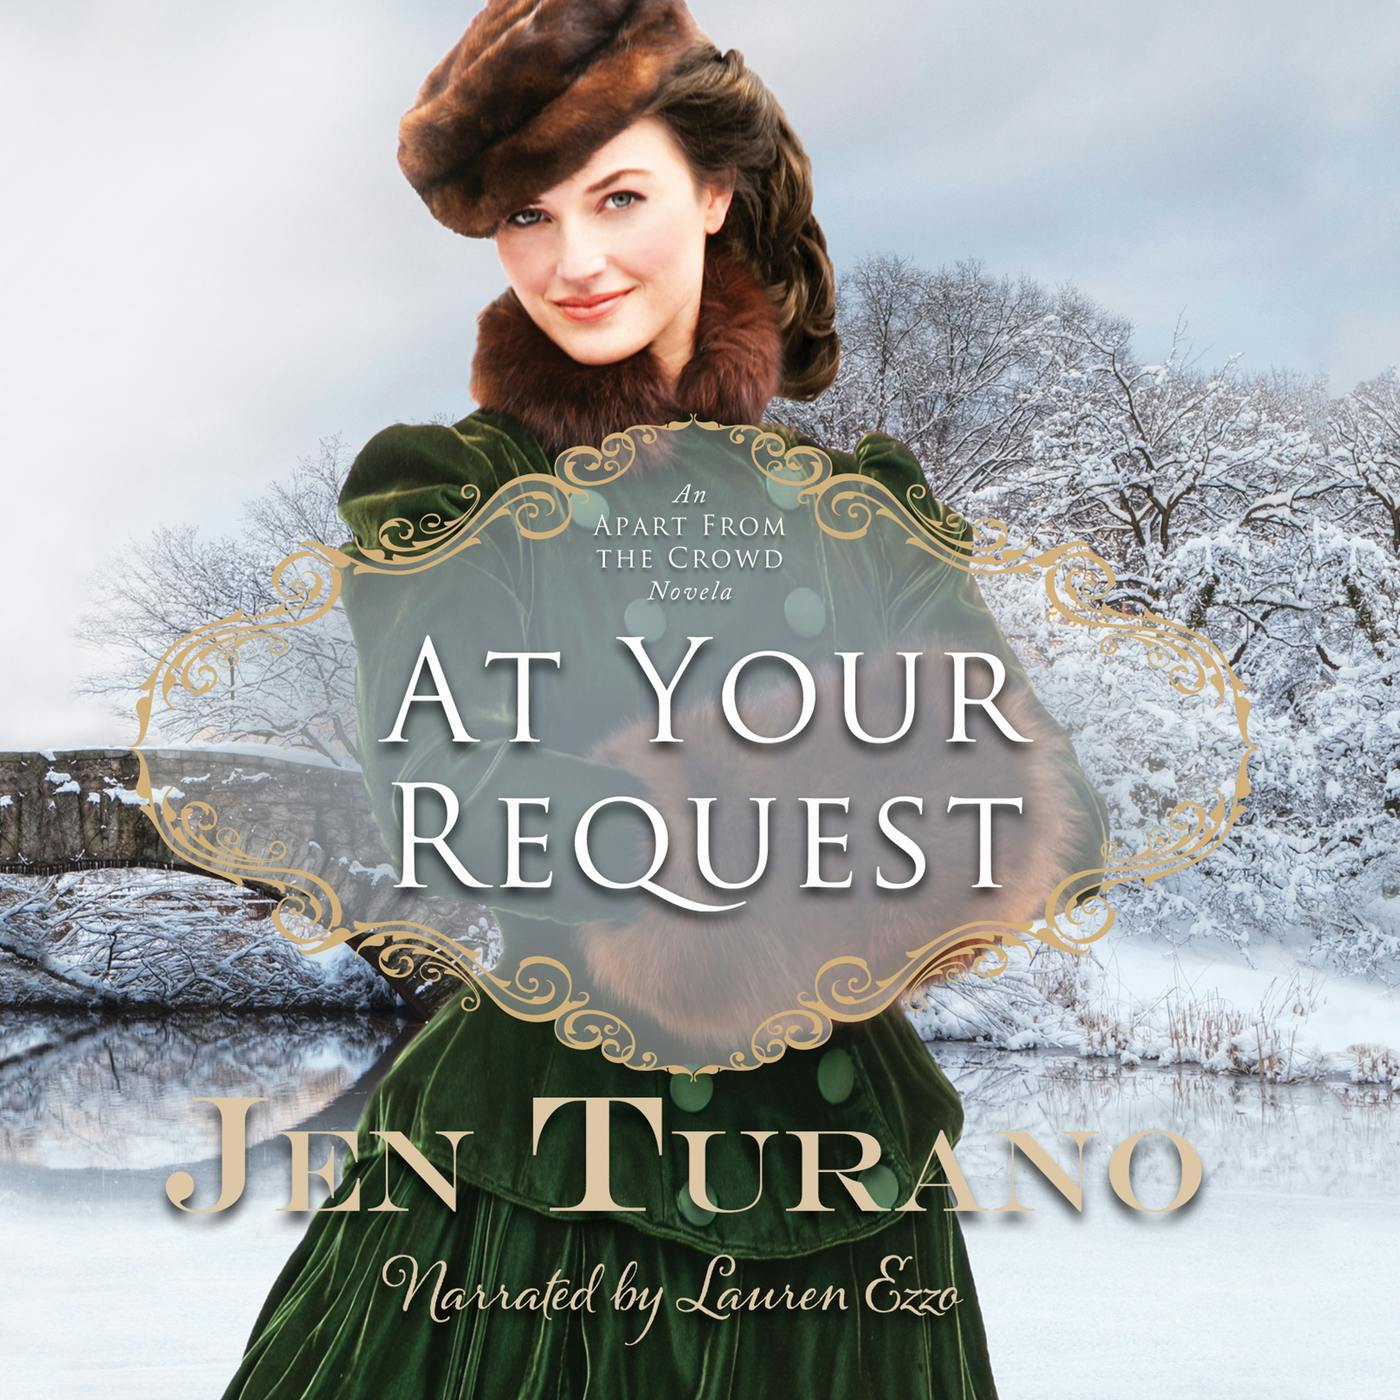 Apart From the Crowd, 0.5: At Your Request (Unabridged) - undefined